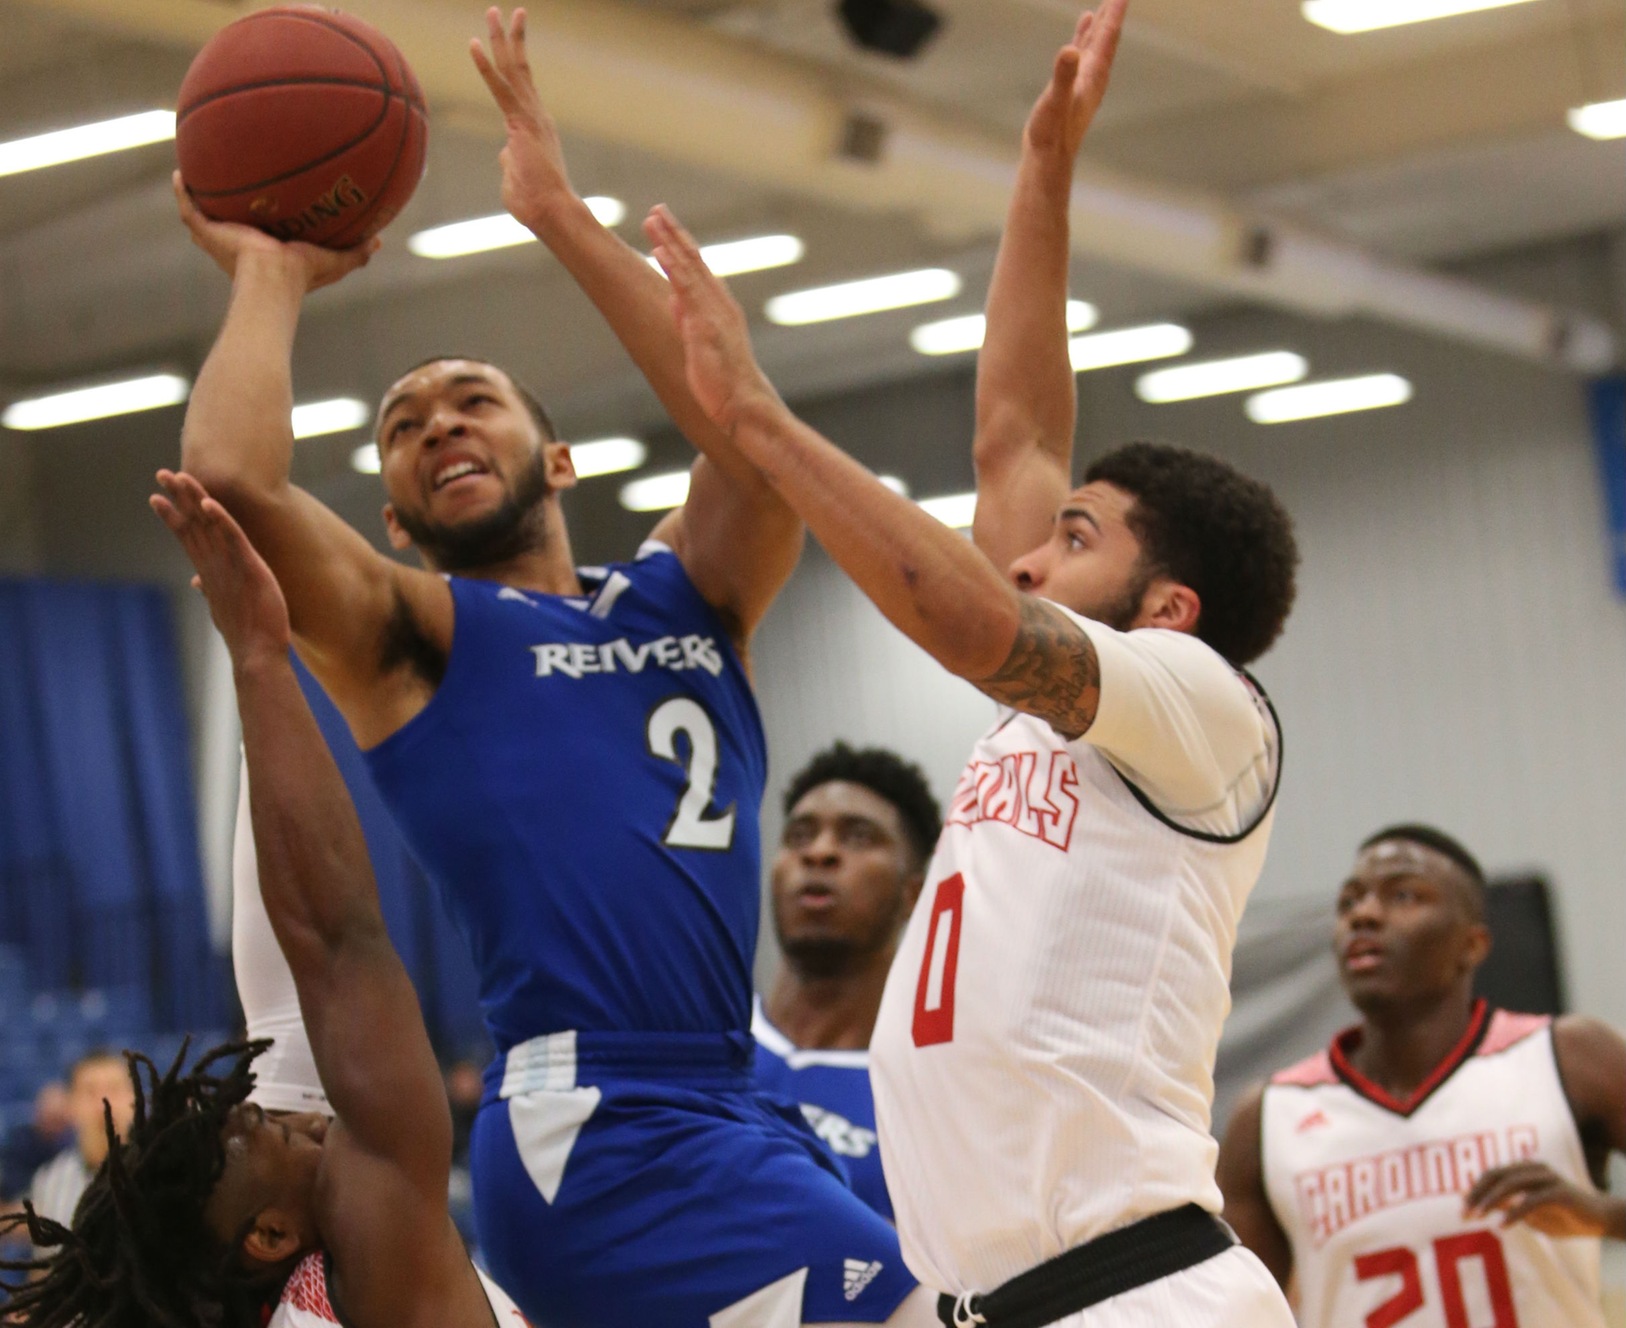 Christian Bentley was one of three Reivers to score in double figures, but it wasn't enough as Iowa Western dropped its opening road conference game at Southeastern.